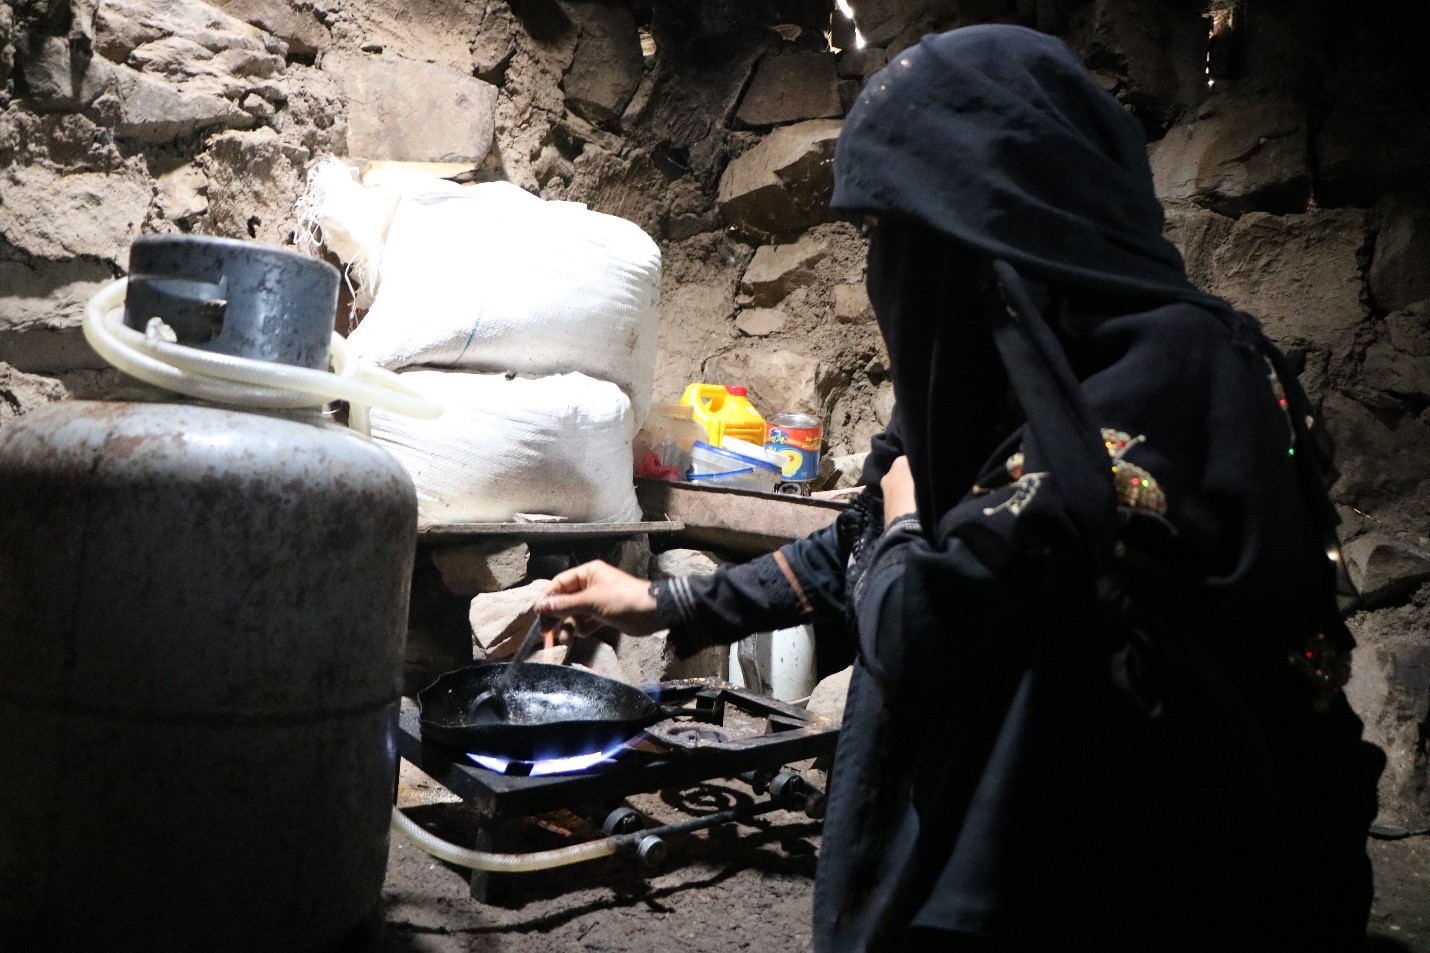 A woman wearing a black Burqa and cooking in a small kitchen